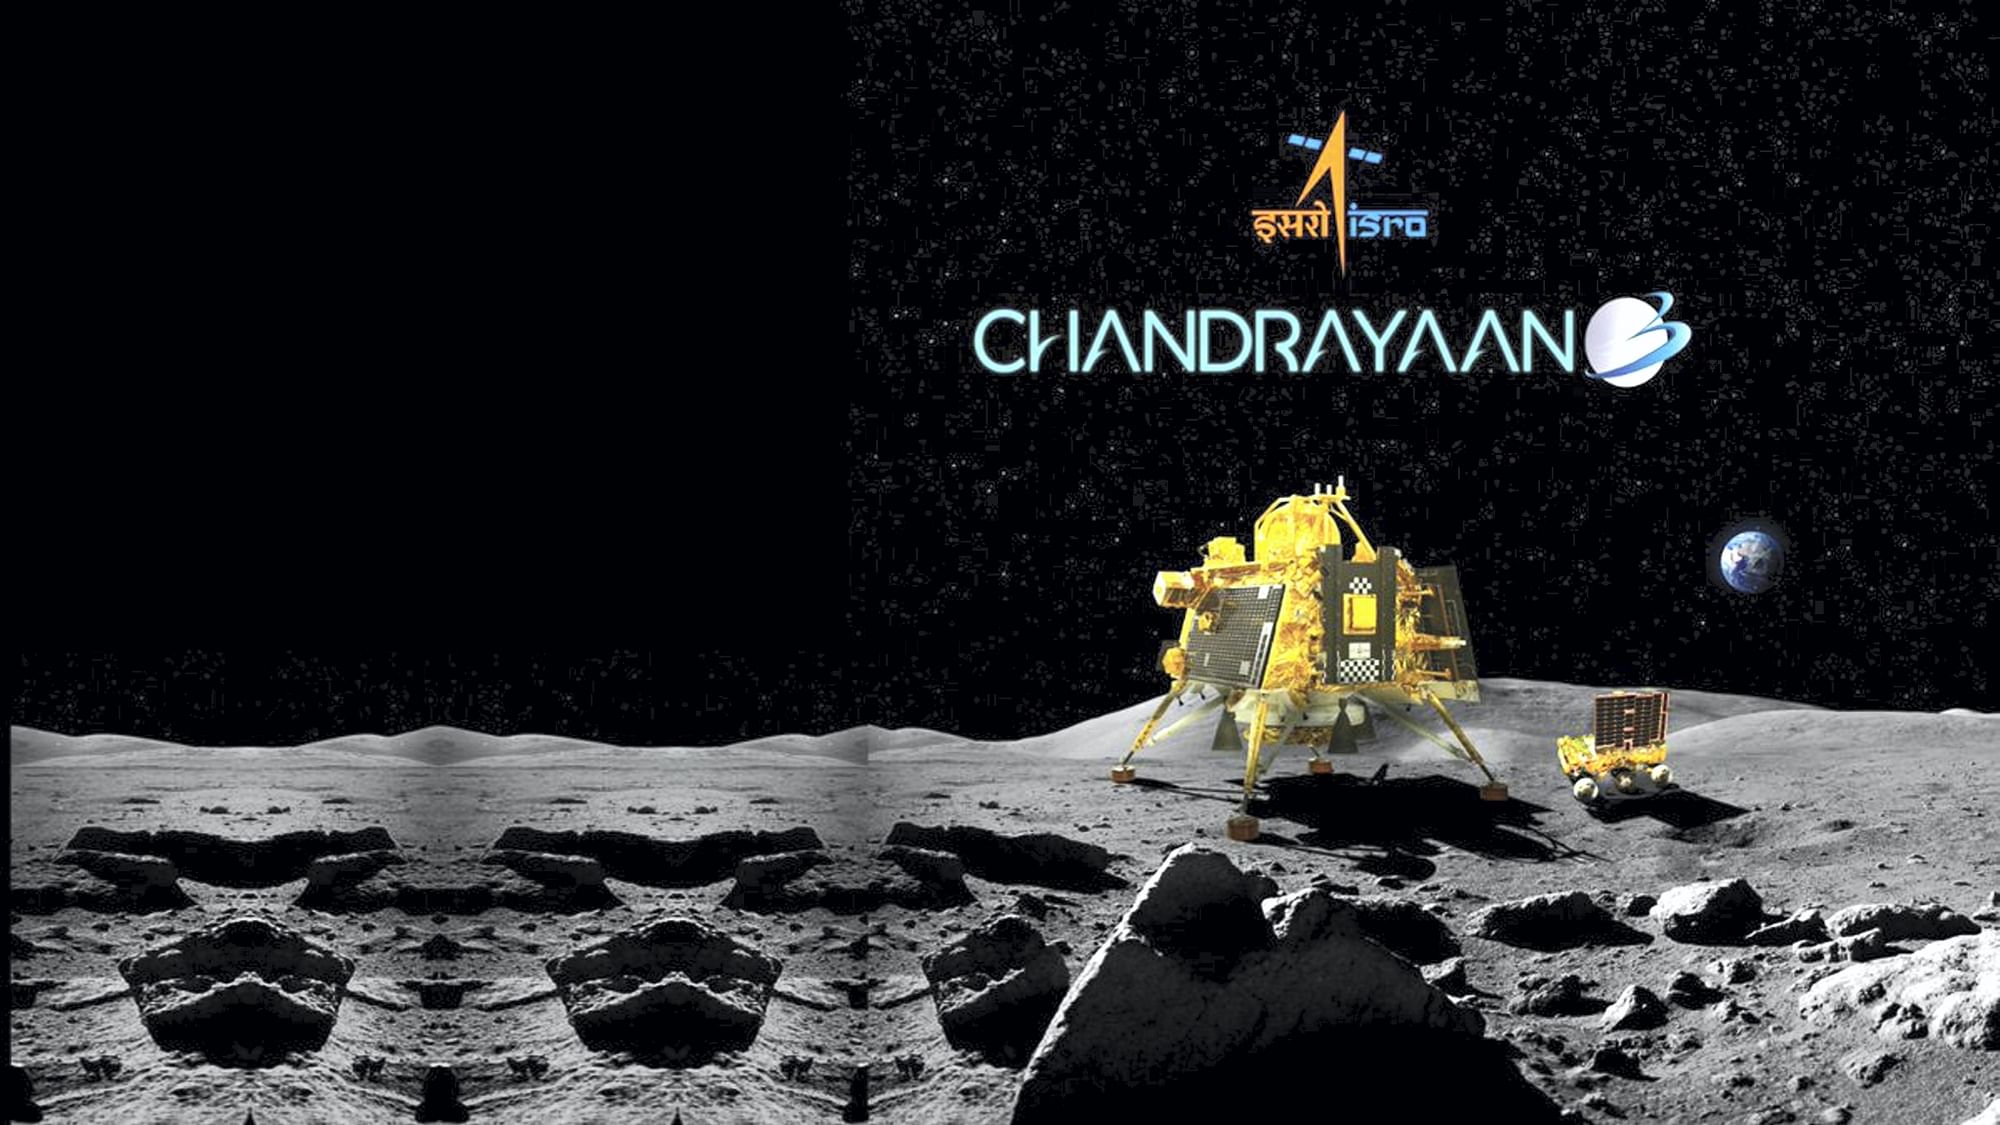 <div class="paragraphs"><p>The Chandrayaan-3 landing module called 'Vikram' is expected to touchdown at the Moon's South Pole on Wednesday evening, 23 August.</p></div>